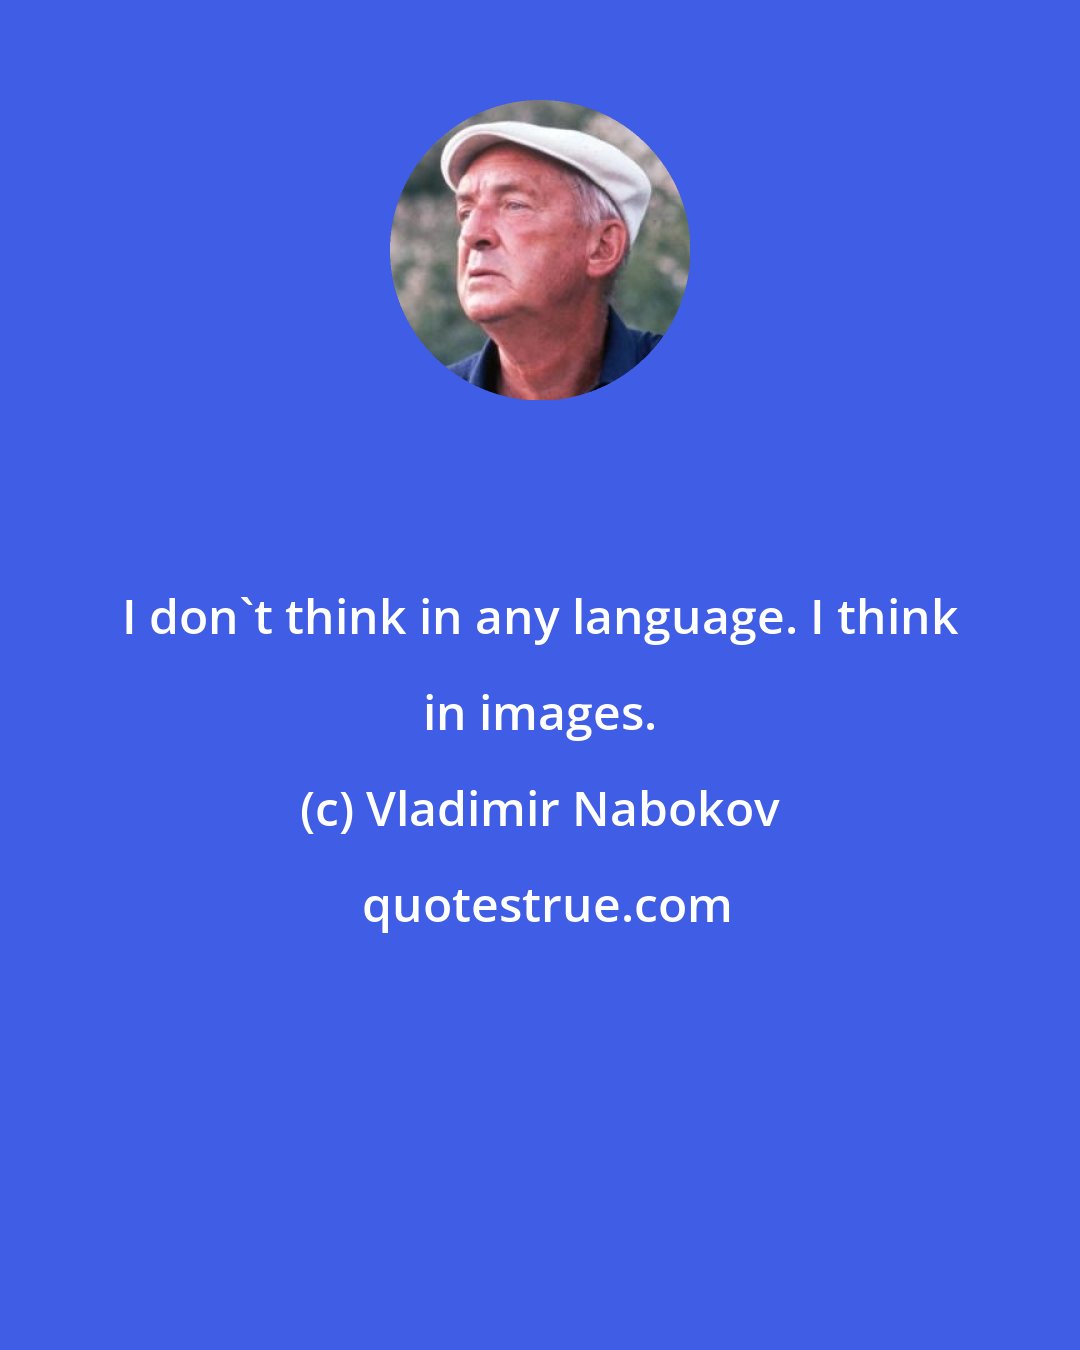 Vladimir Nabokov: I don't think in any language. I think in images.